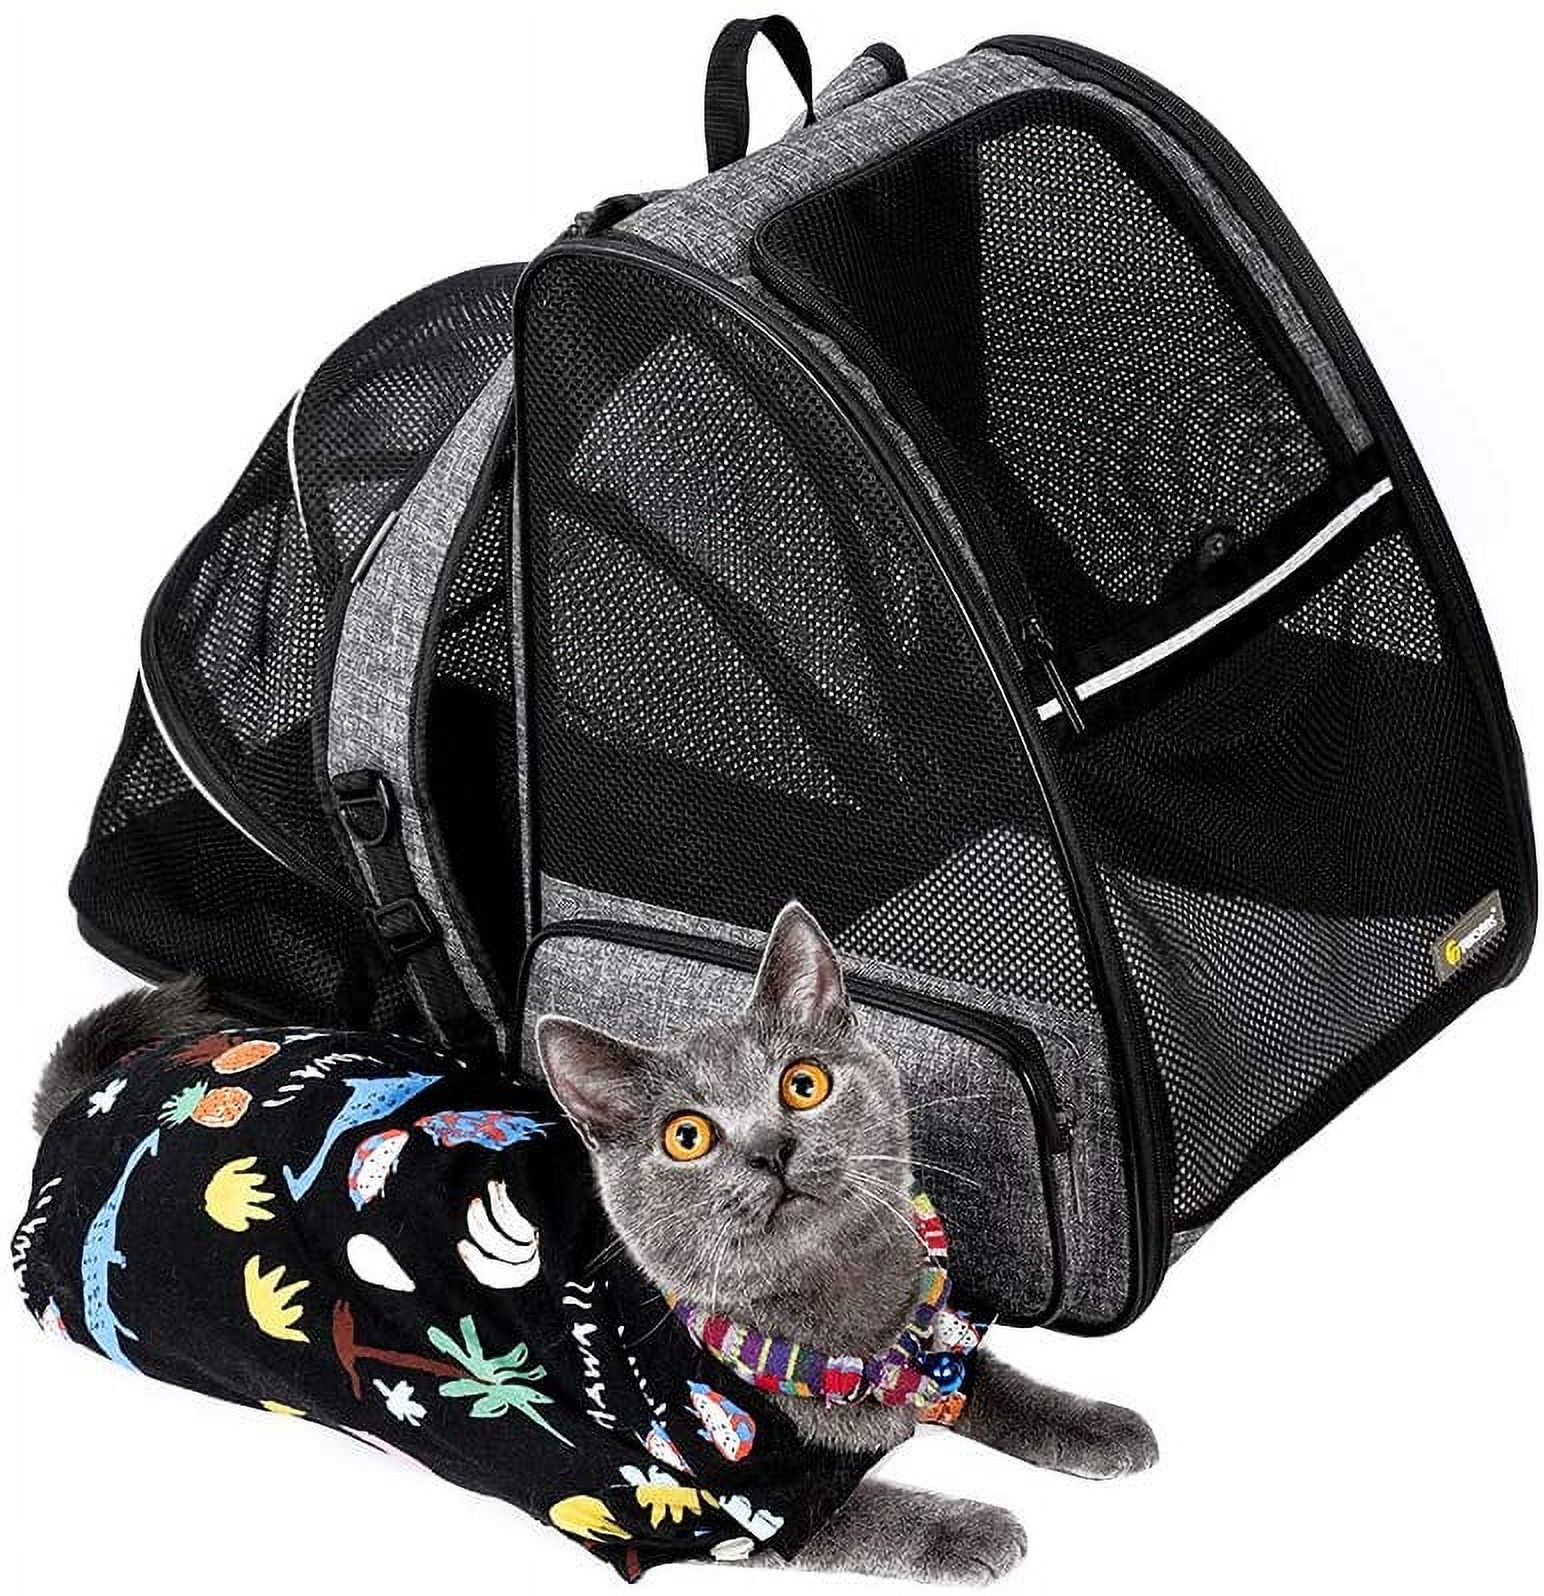 Texsens Cat Backpack Carrier, Super Breathable Carrier Backpack, Airline-Approved Bubble Cats and Puppies Backpacks, Designed for Hiking, Travel& Walking (Expandable Grsy) - image 1 of 8